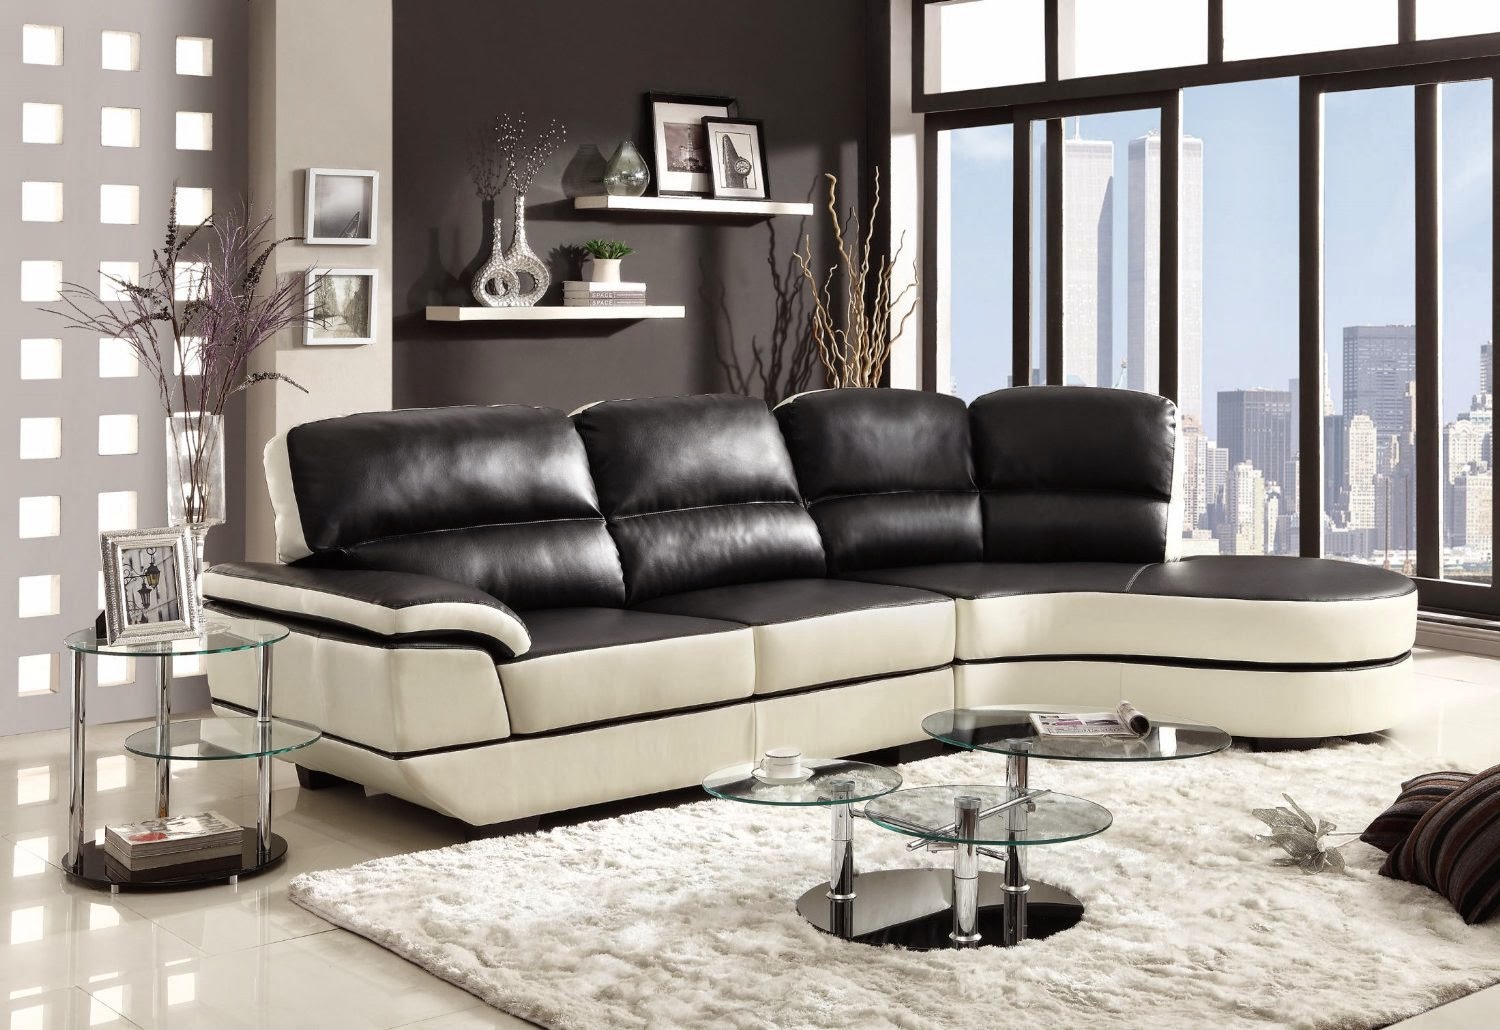  Curved  Sofa  Website Reviews Curved Sectional Sofa  With Chaise